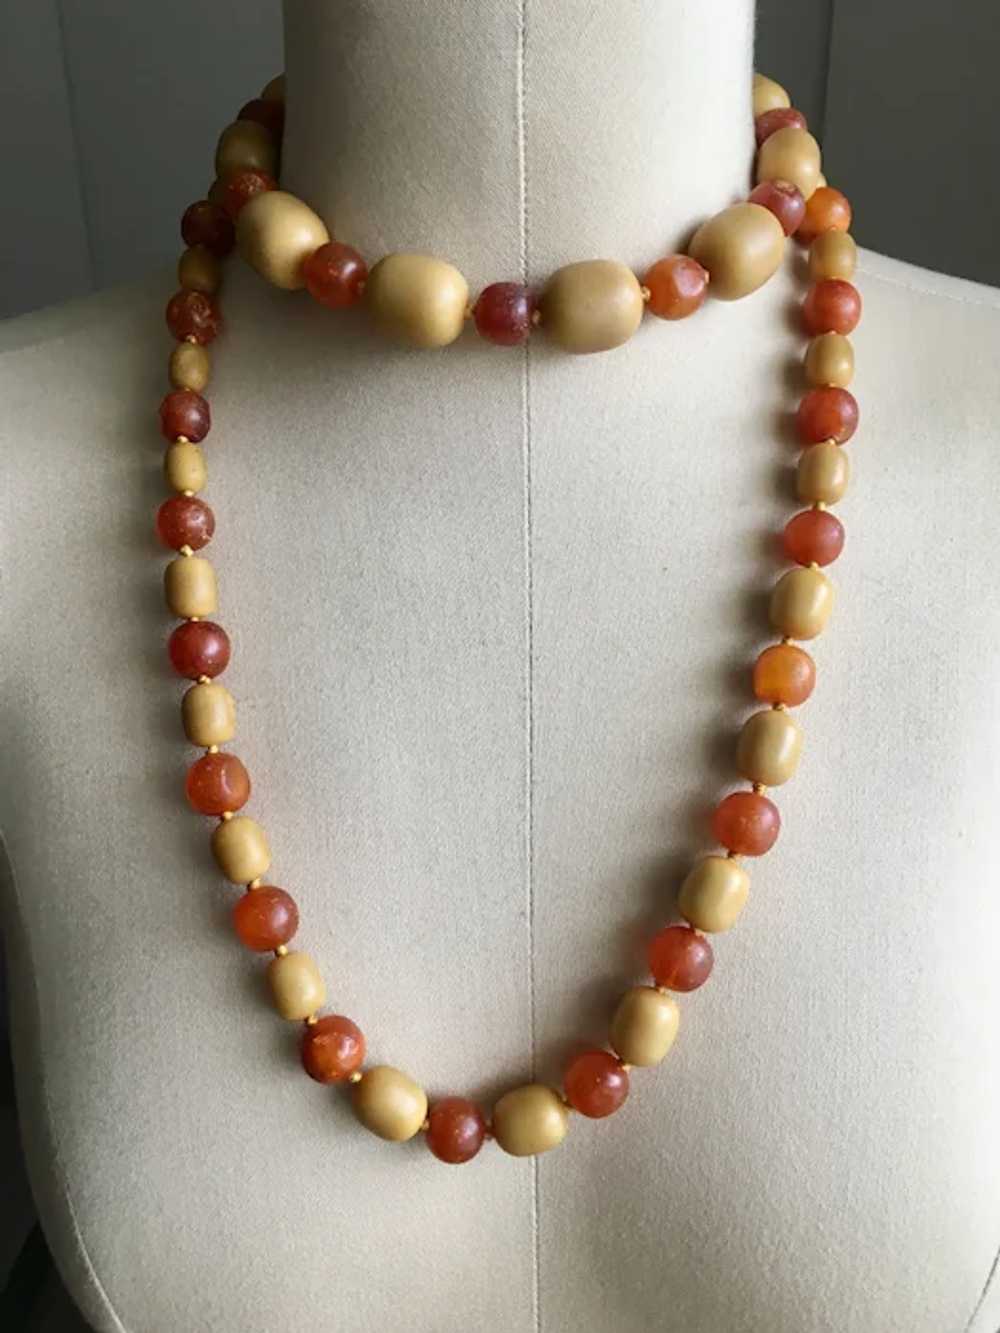 Two Amber Necklaces, Unpolished Oval & Round Beads - image 2